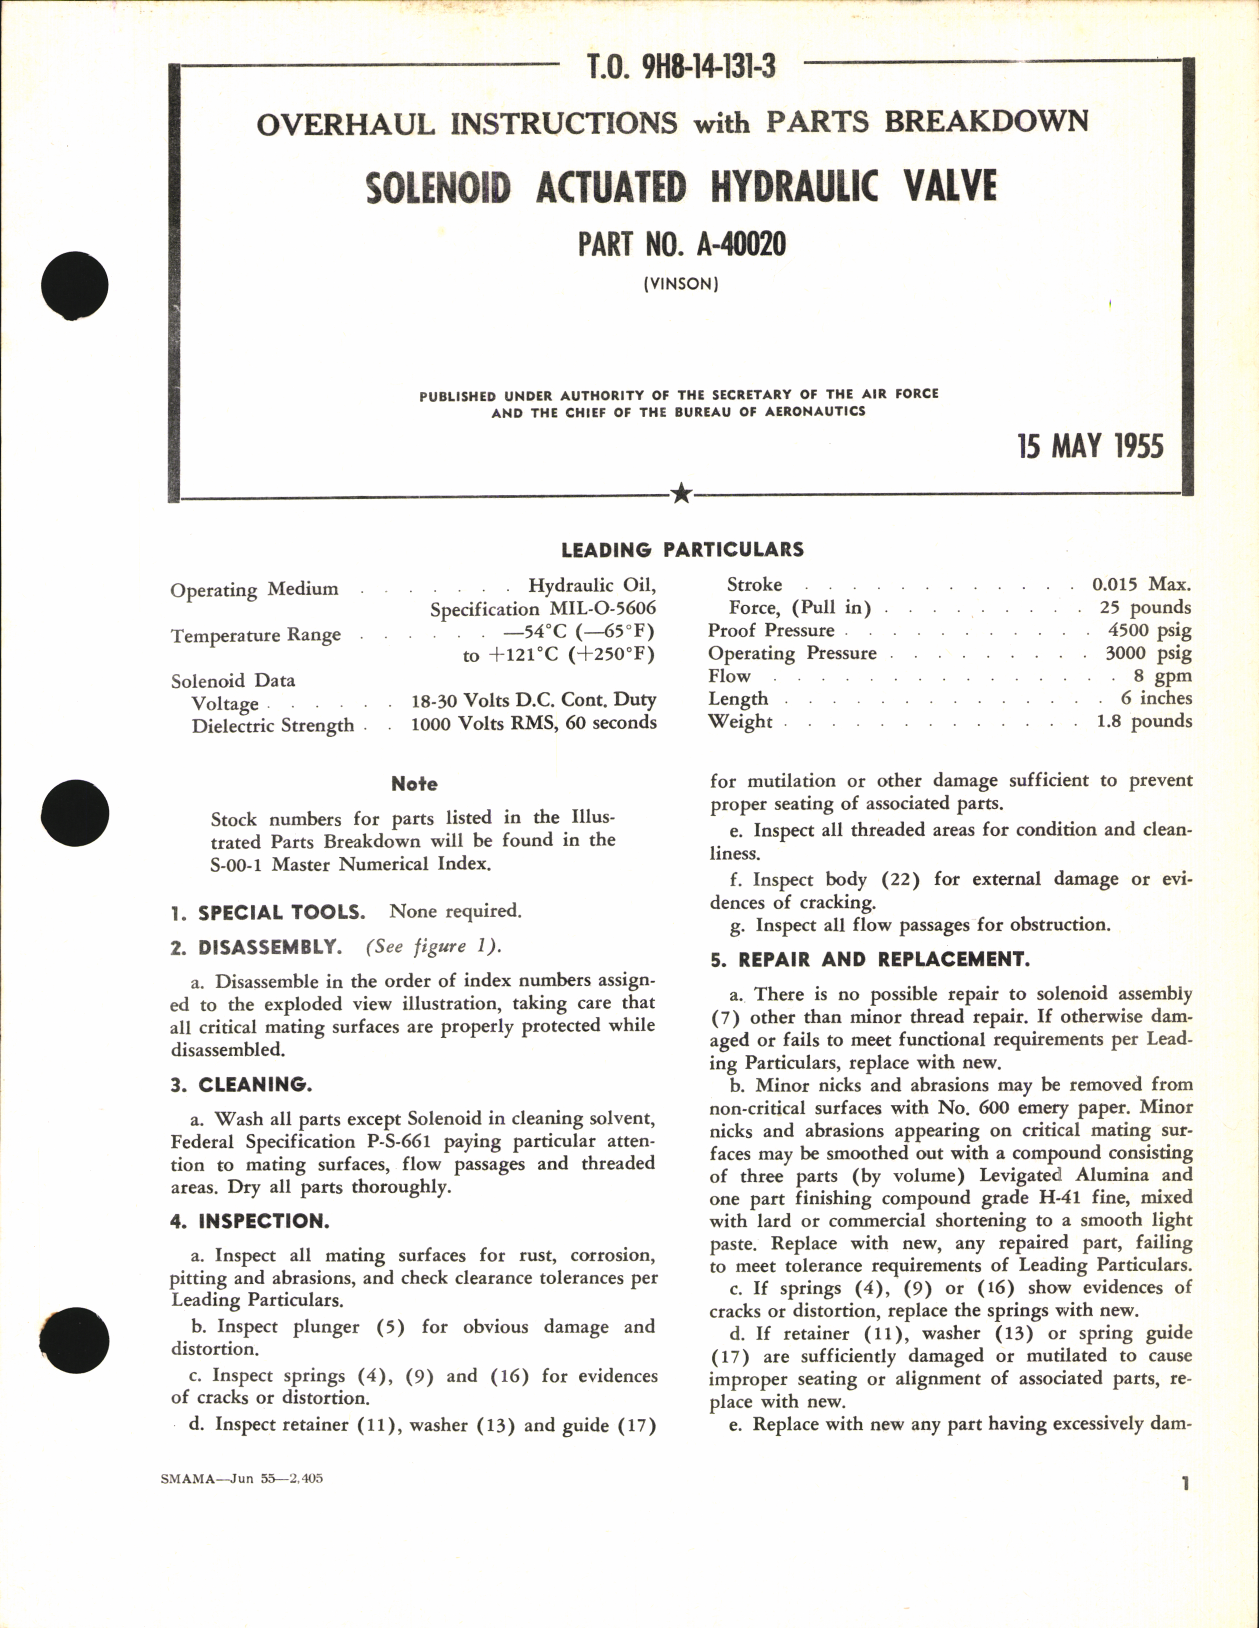 Sample page 1 from AirCorps Library document: Overhaul Instructions with Parts Breakdown for Solenoid Actuated Hydraulic valve Part No. A-40020